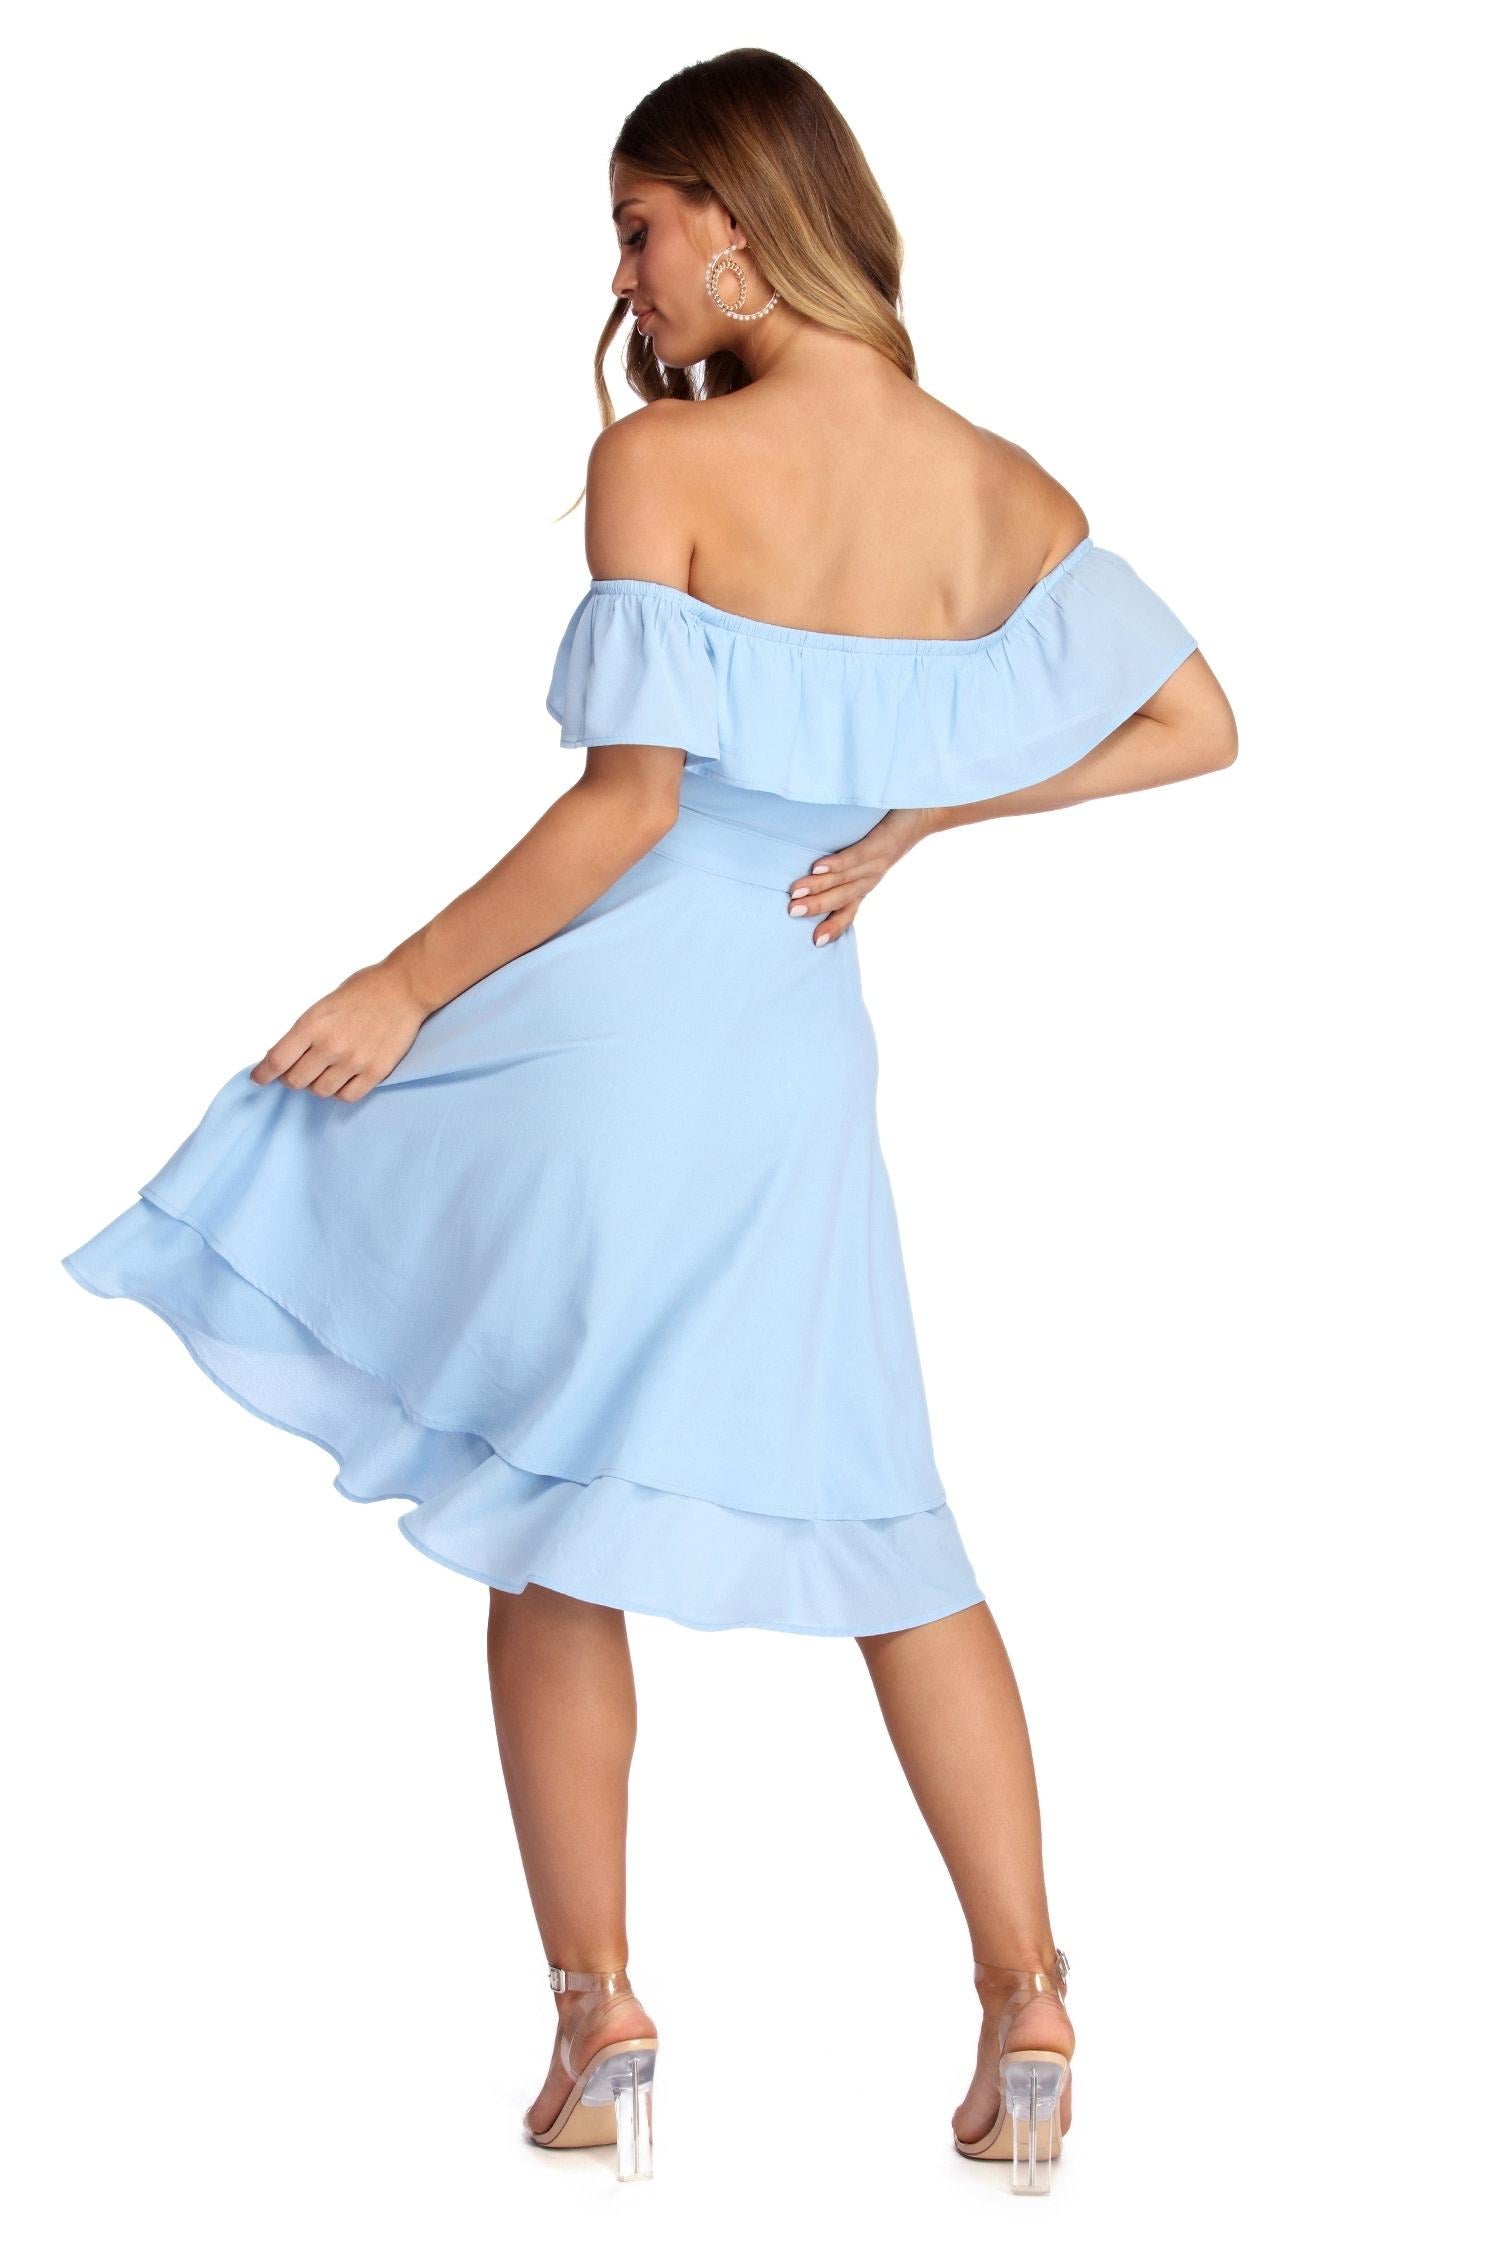 Chasing Dreams Ruffle Dress - Lady Occasions